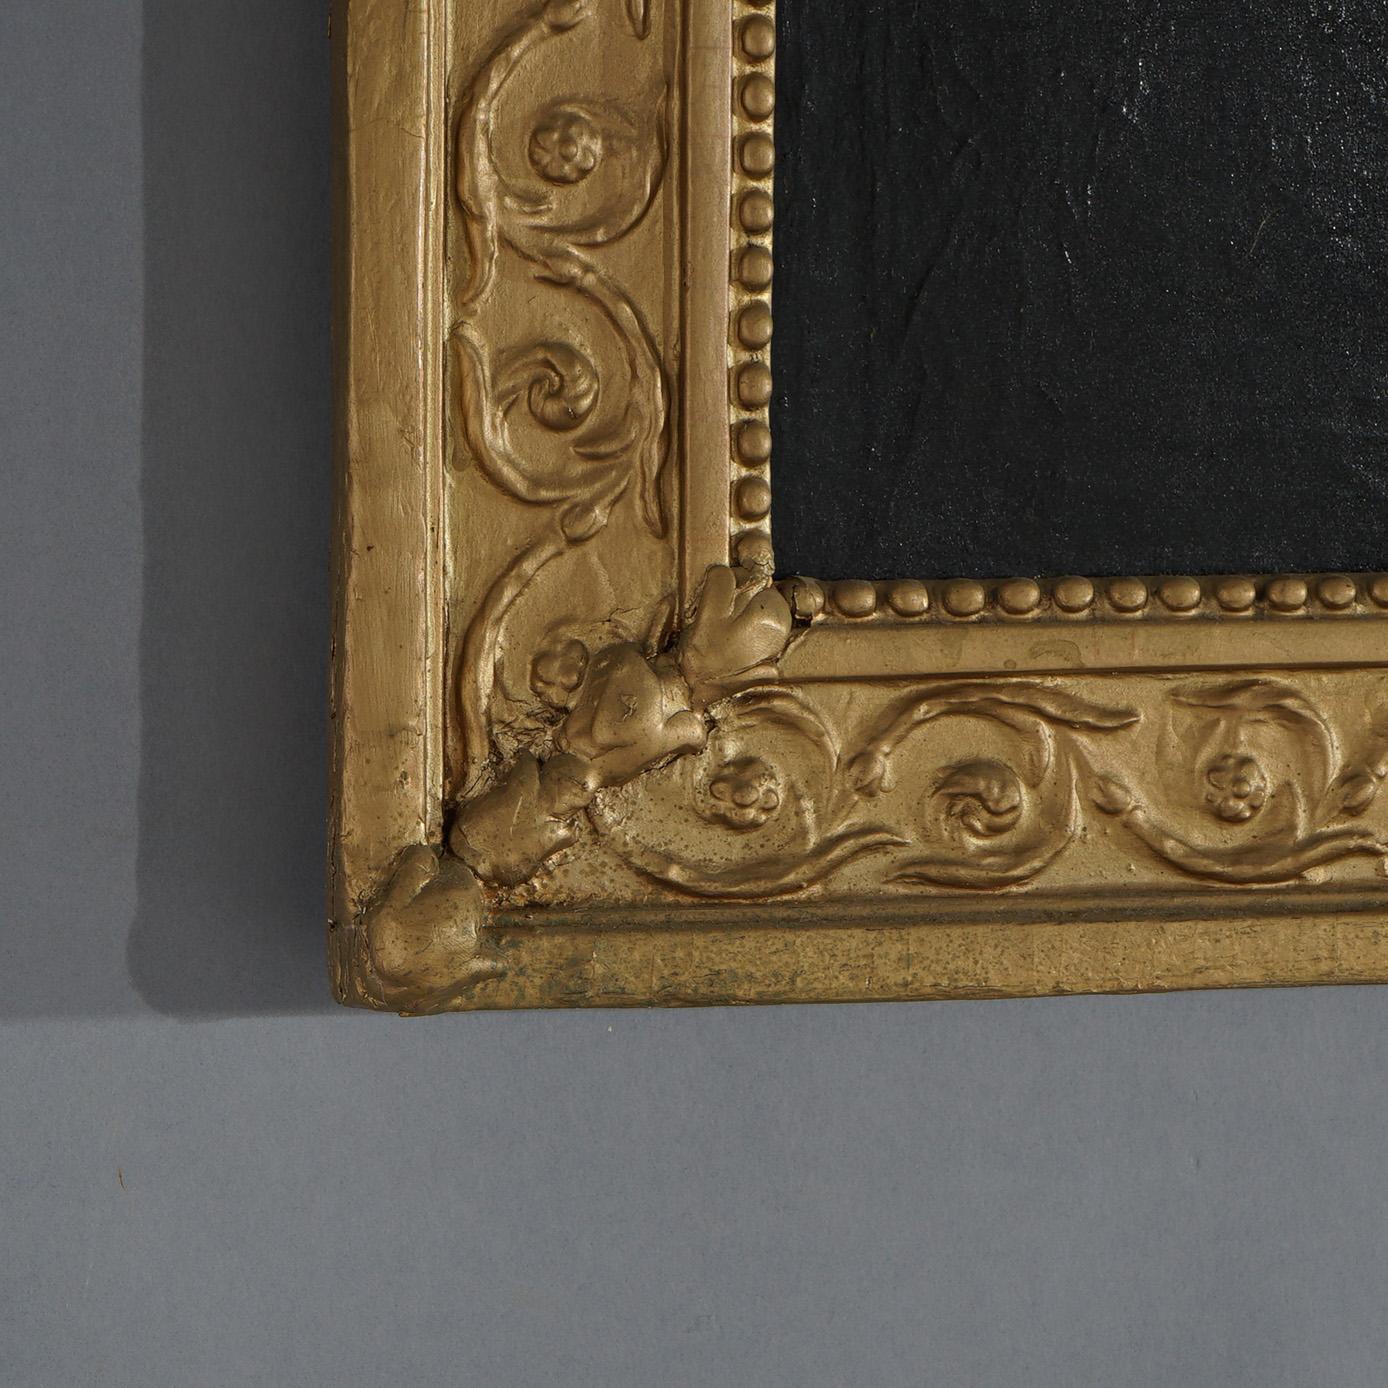 Antique Oil on Canvas Portrait of A Nobleman in Original Giltwood Frame 18thC

Measures - 33.75